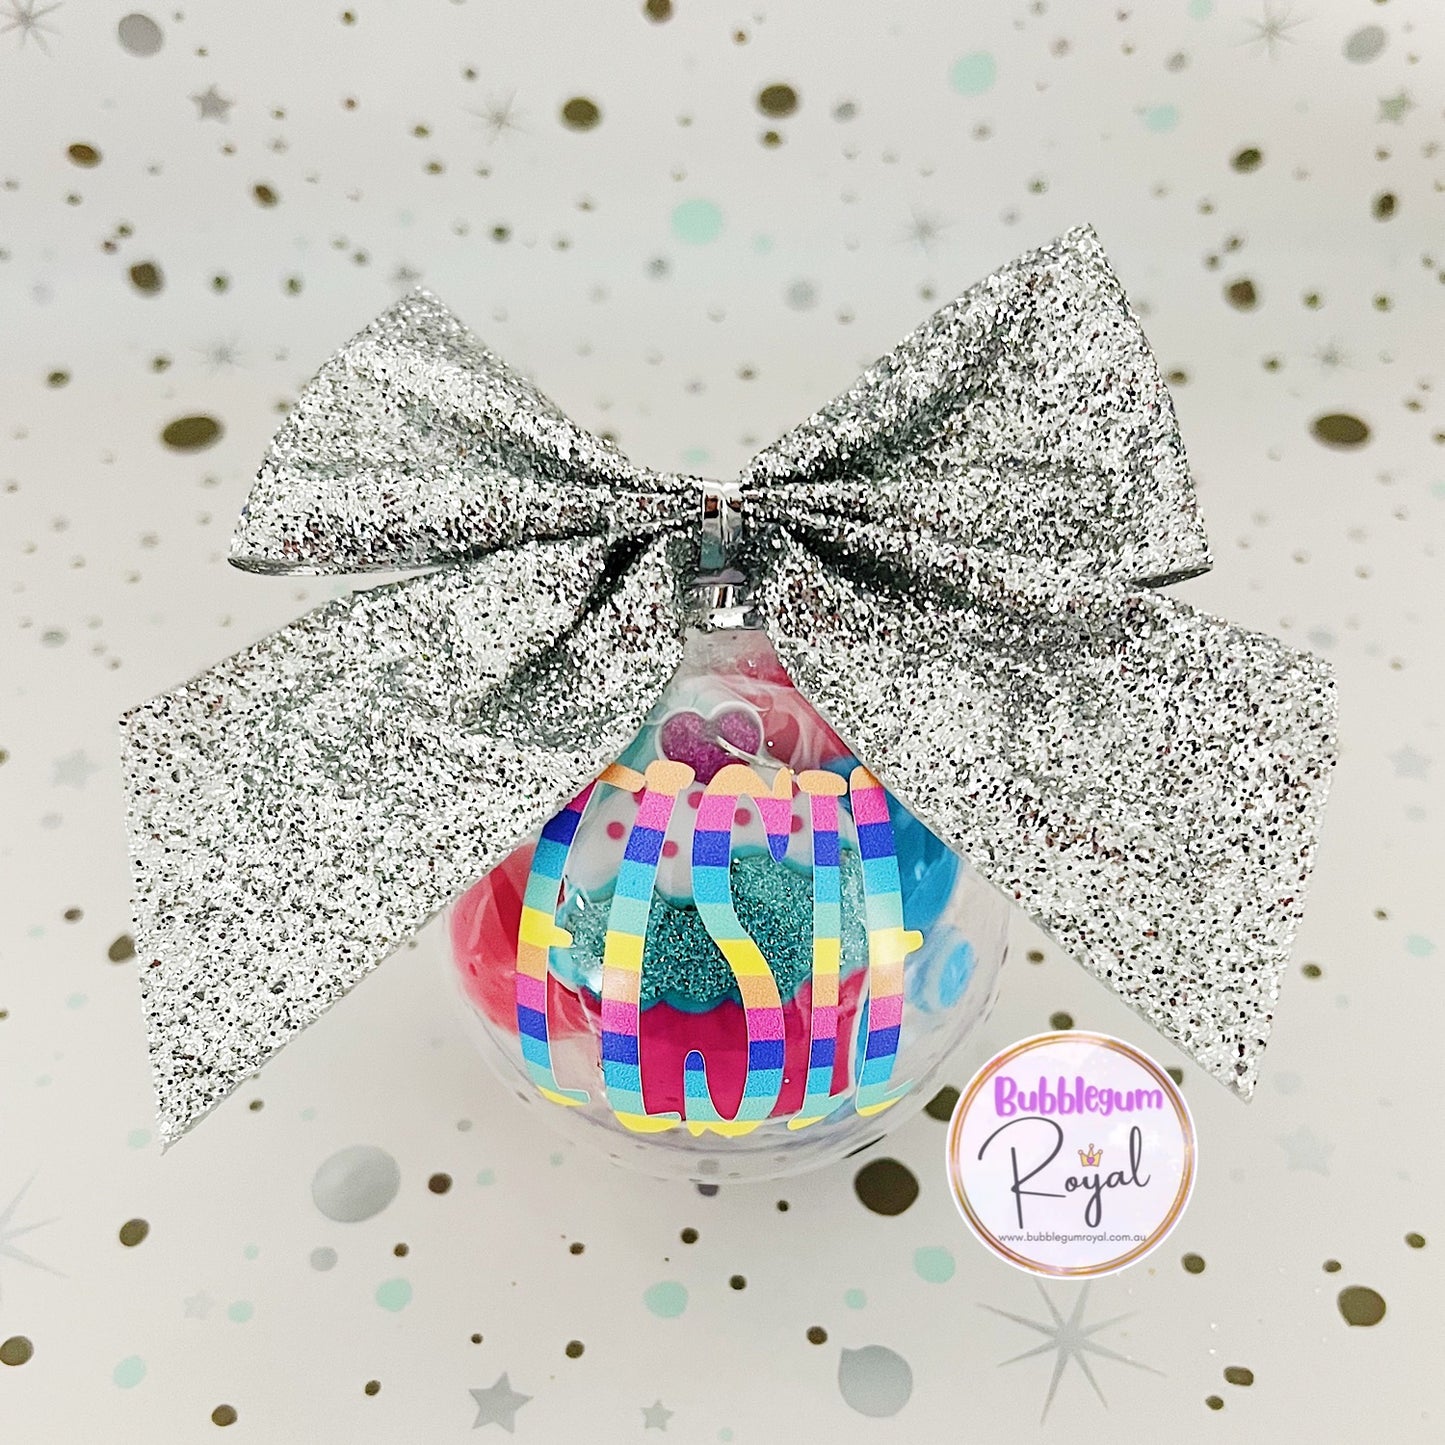 Cupcake - Personalised Bauble - Necklace or DIY Kit